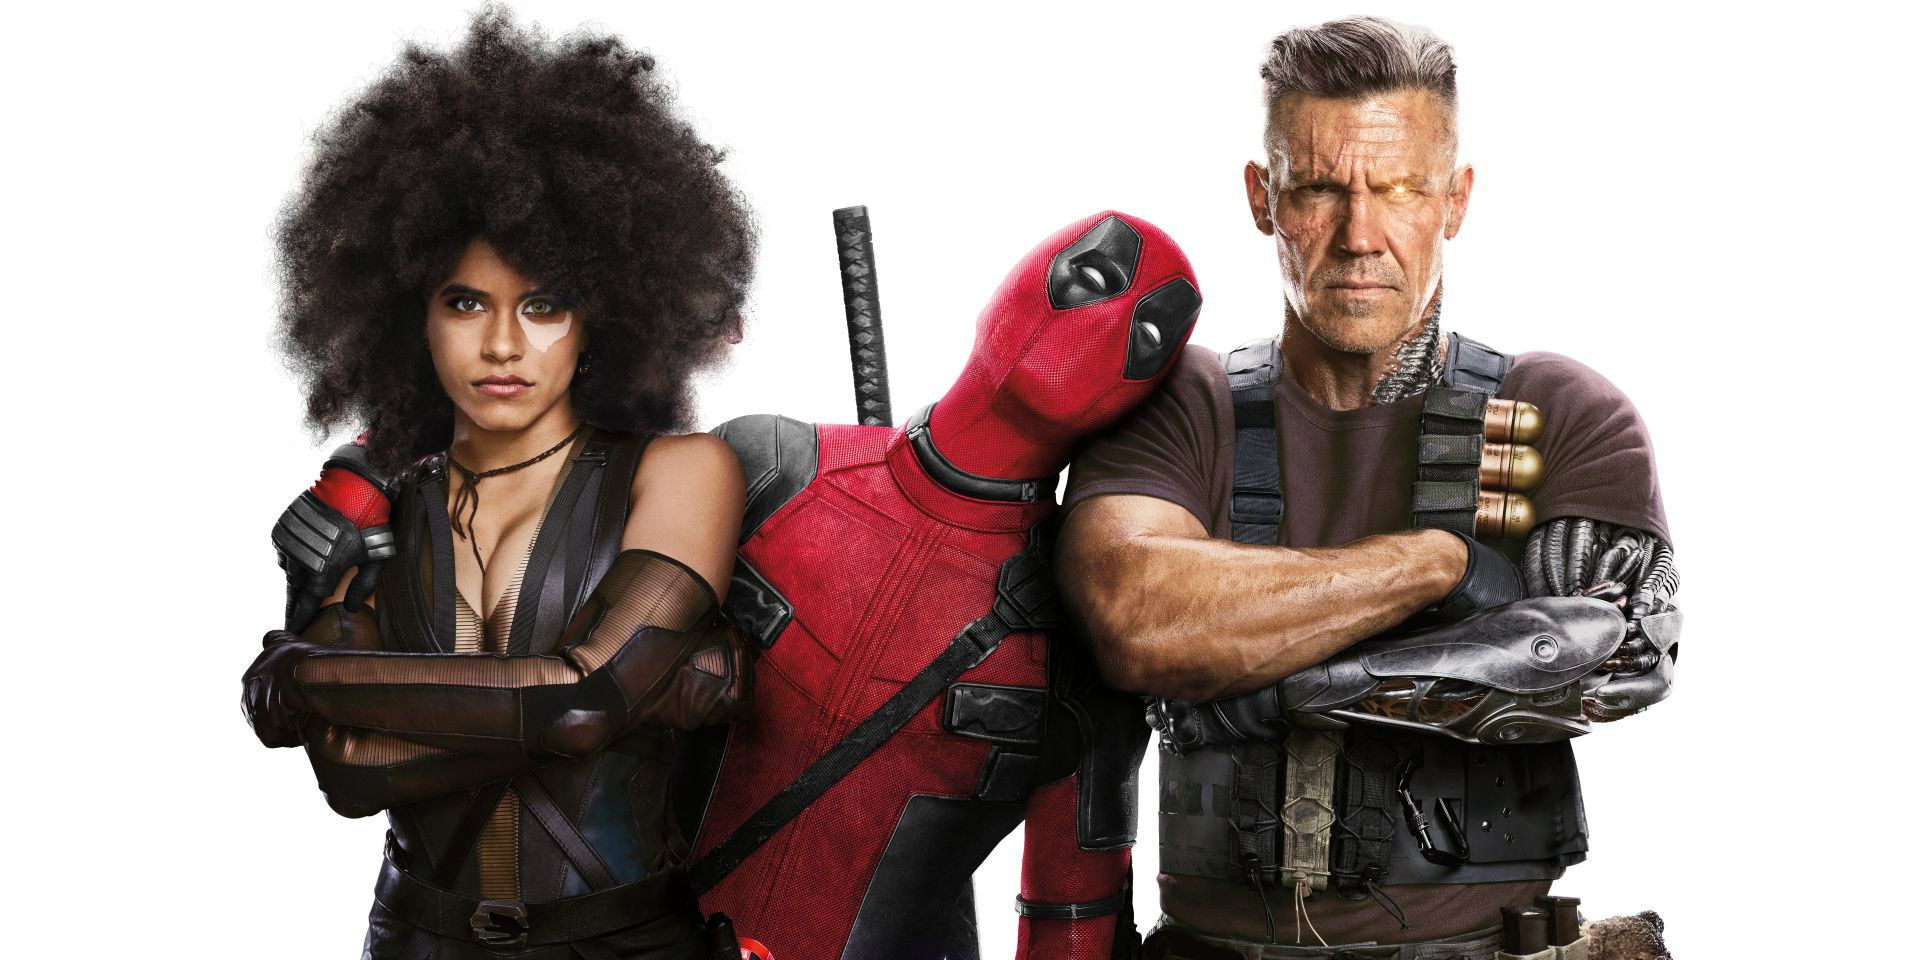 Domino Deadpool and Cable from Deadpool 2